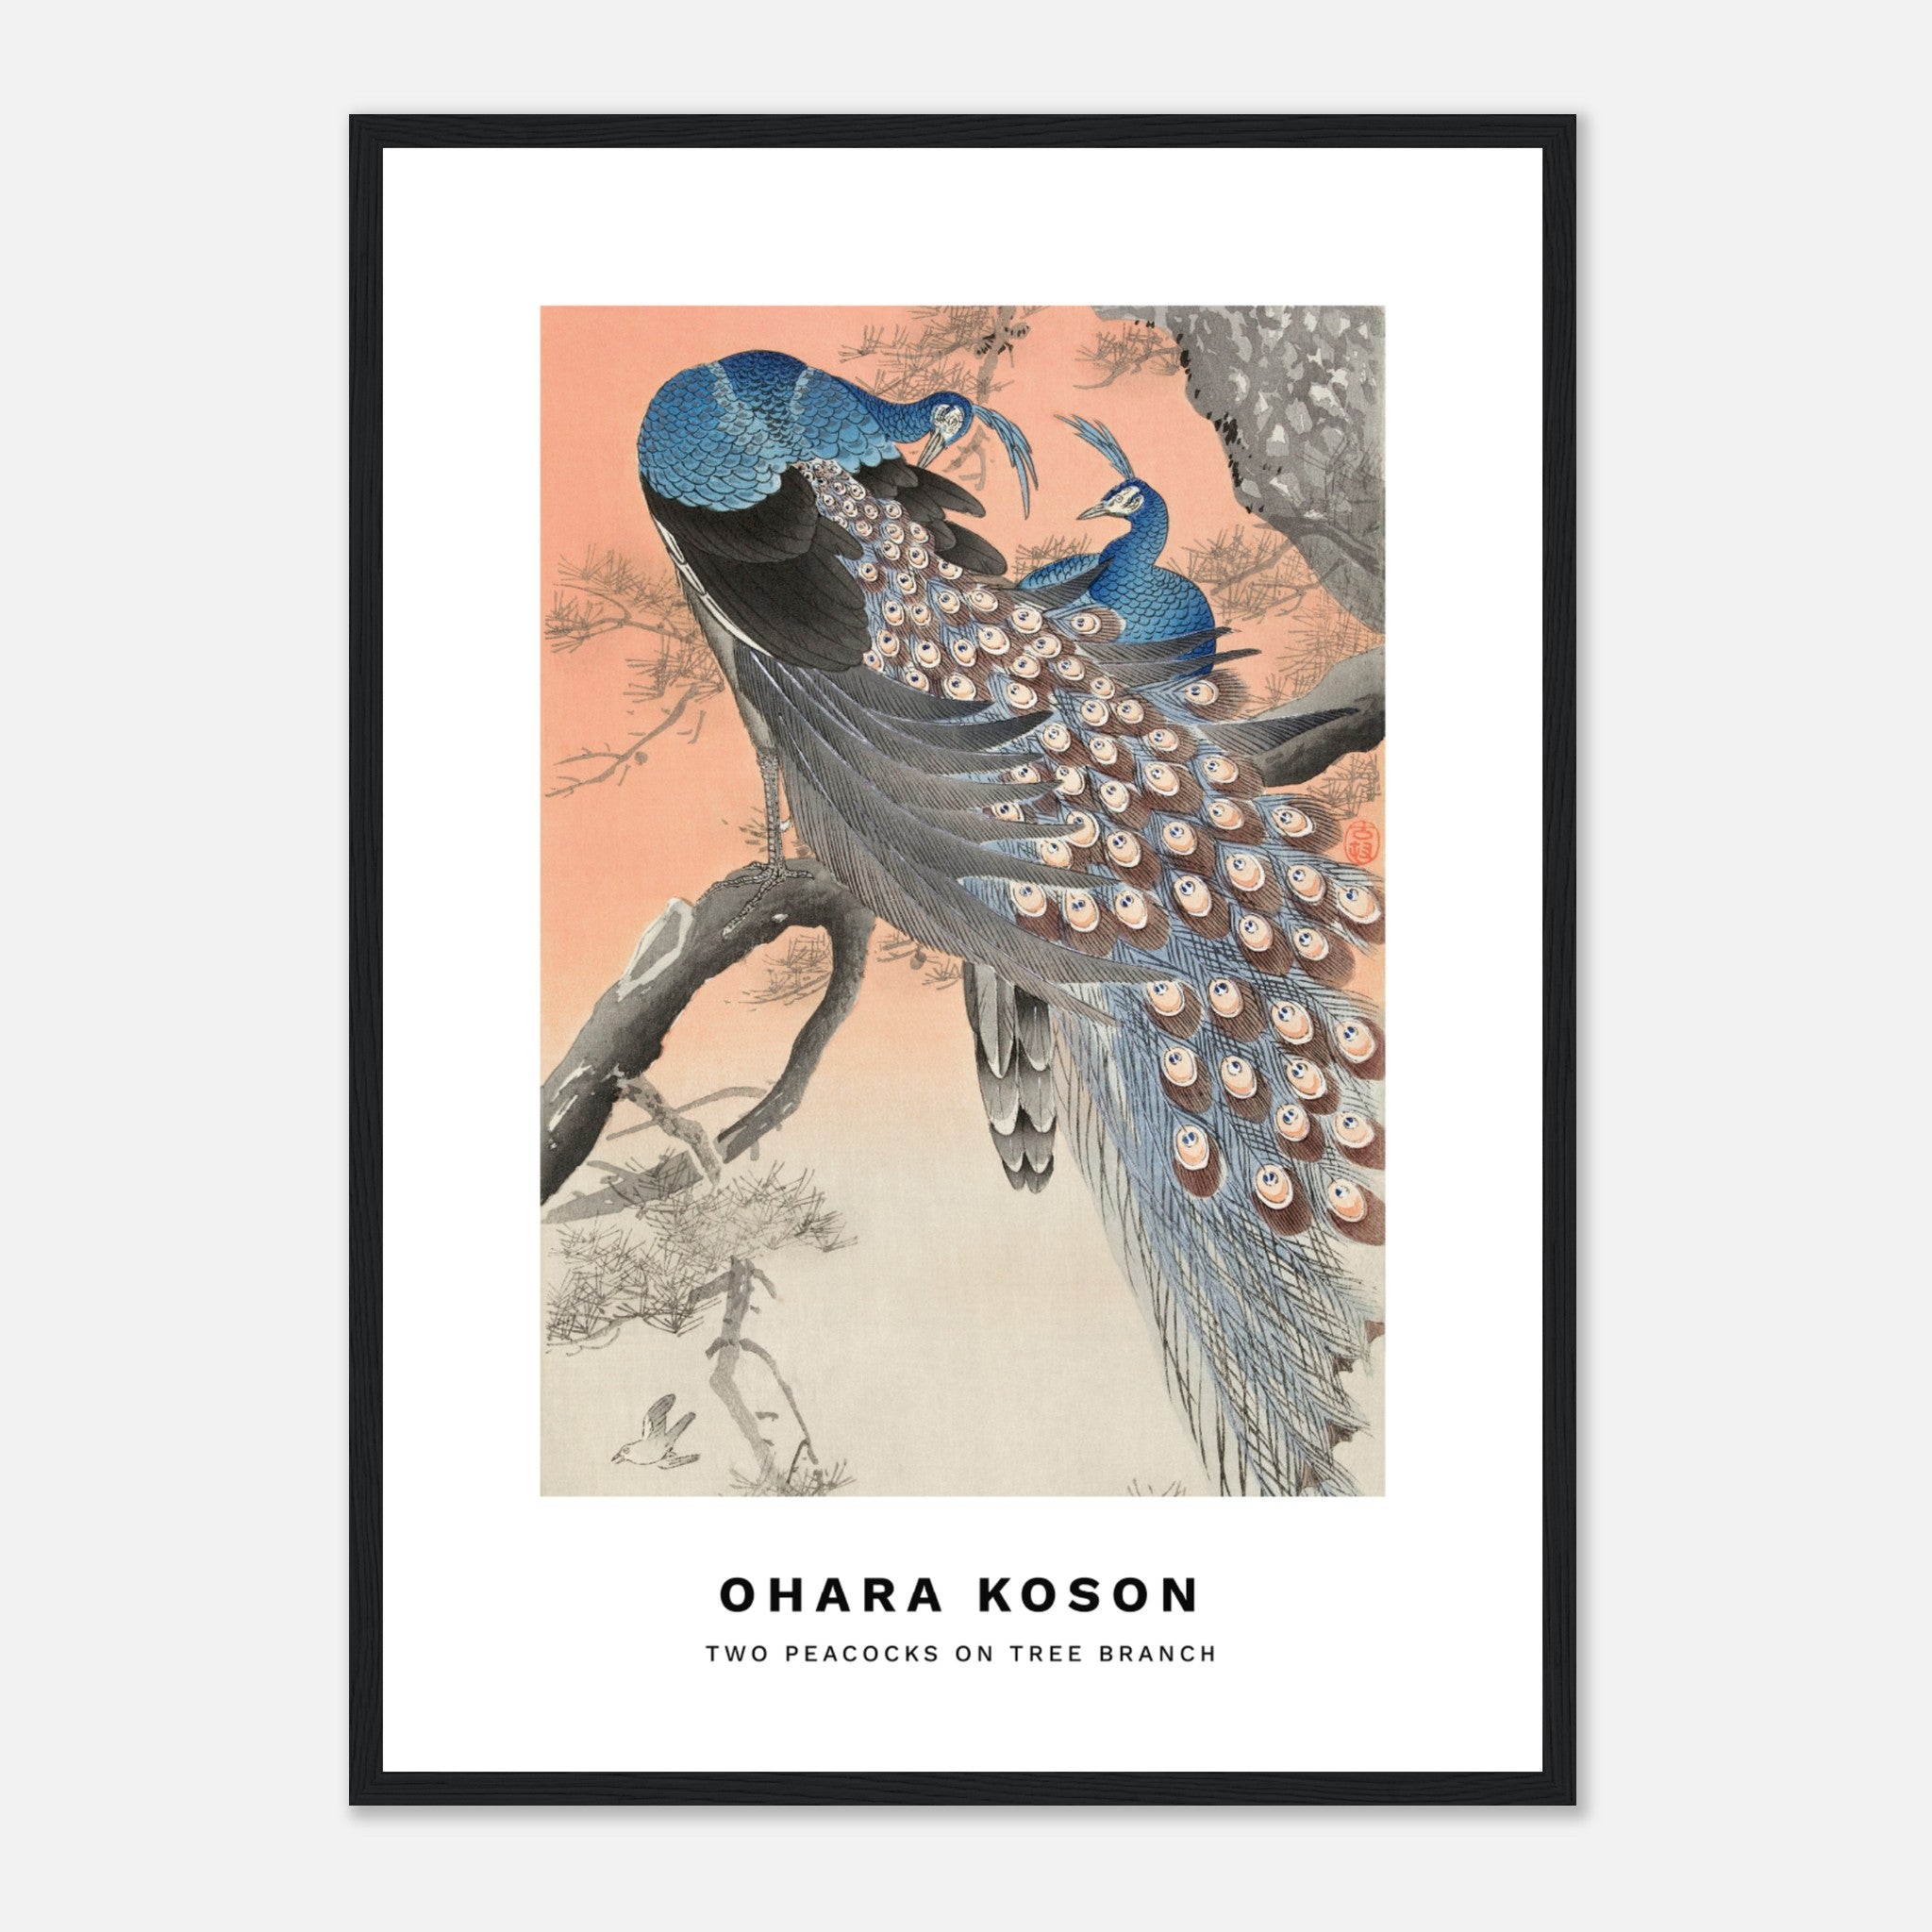 Two peacocks on tree branch by Ohara Koson Poster